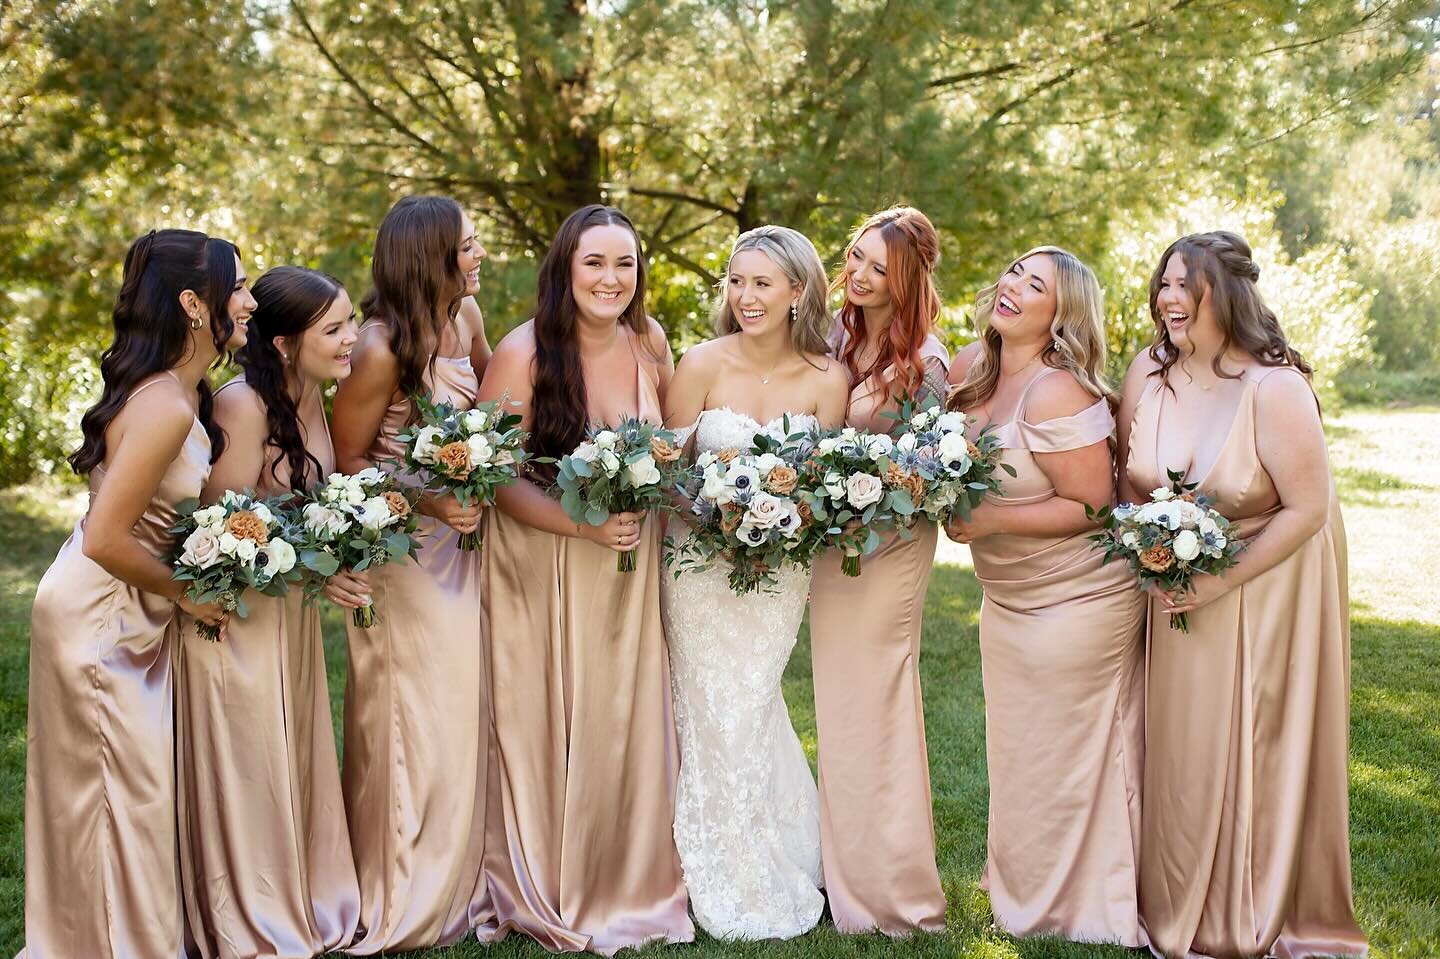 💐 Surrounded by love and laughter, Maddison shines brightest with her beautiful bridesmaids by her side! 💖✨ Here&rsquo;s to lifelong friendships and unforgettable moments. Cheers to this stunning group of ladies! 👰👯&zwj;♀️💕
Photography: @tanya.e